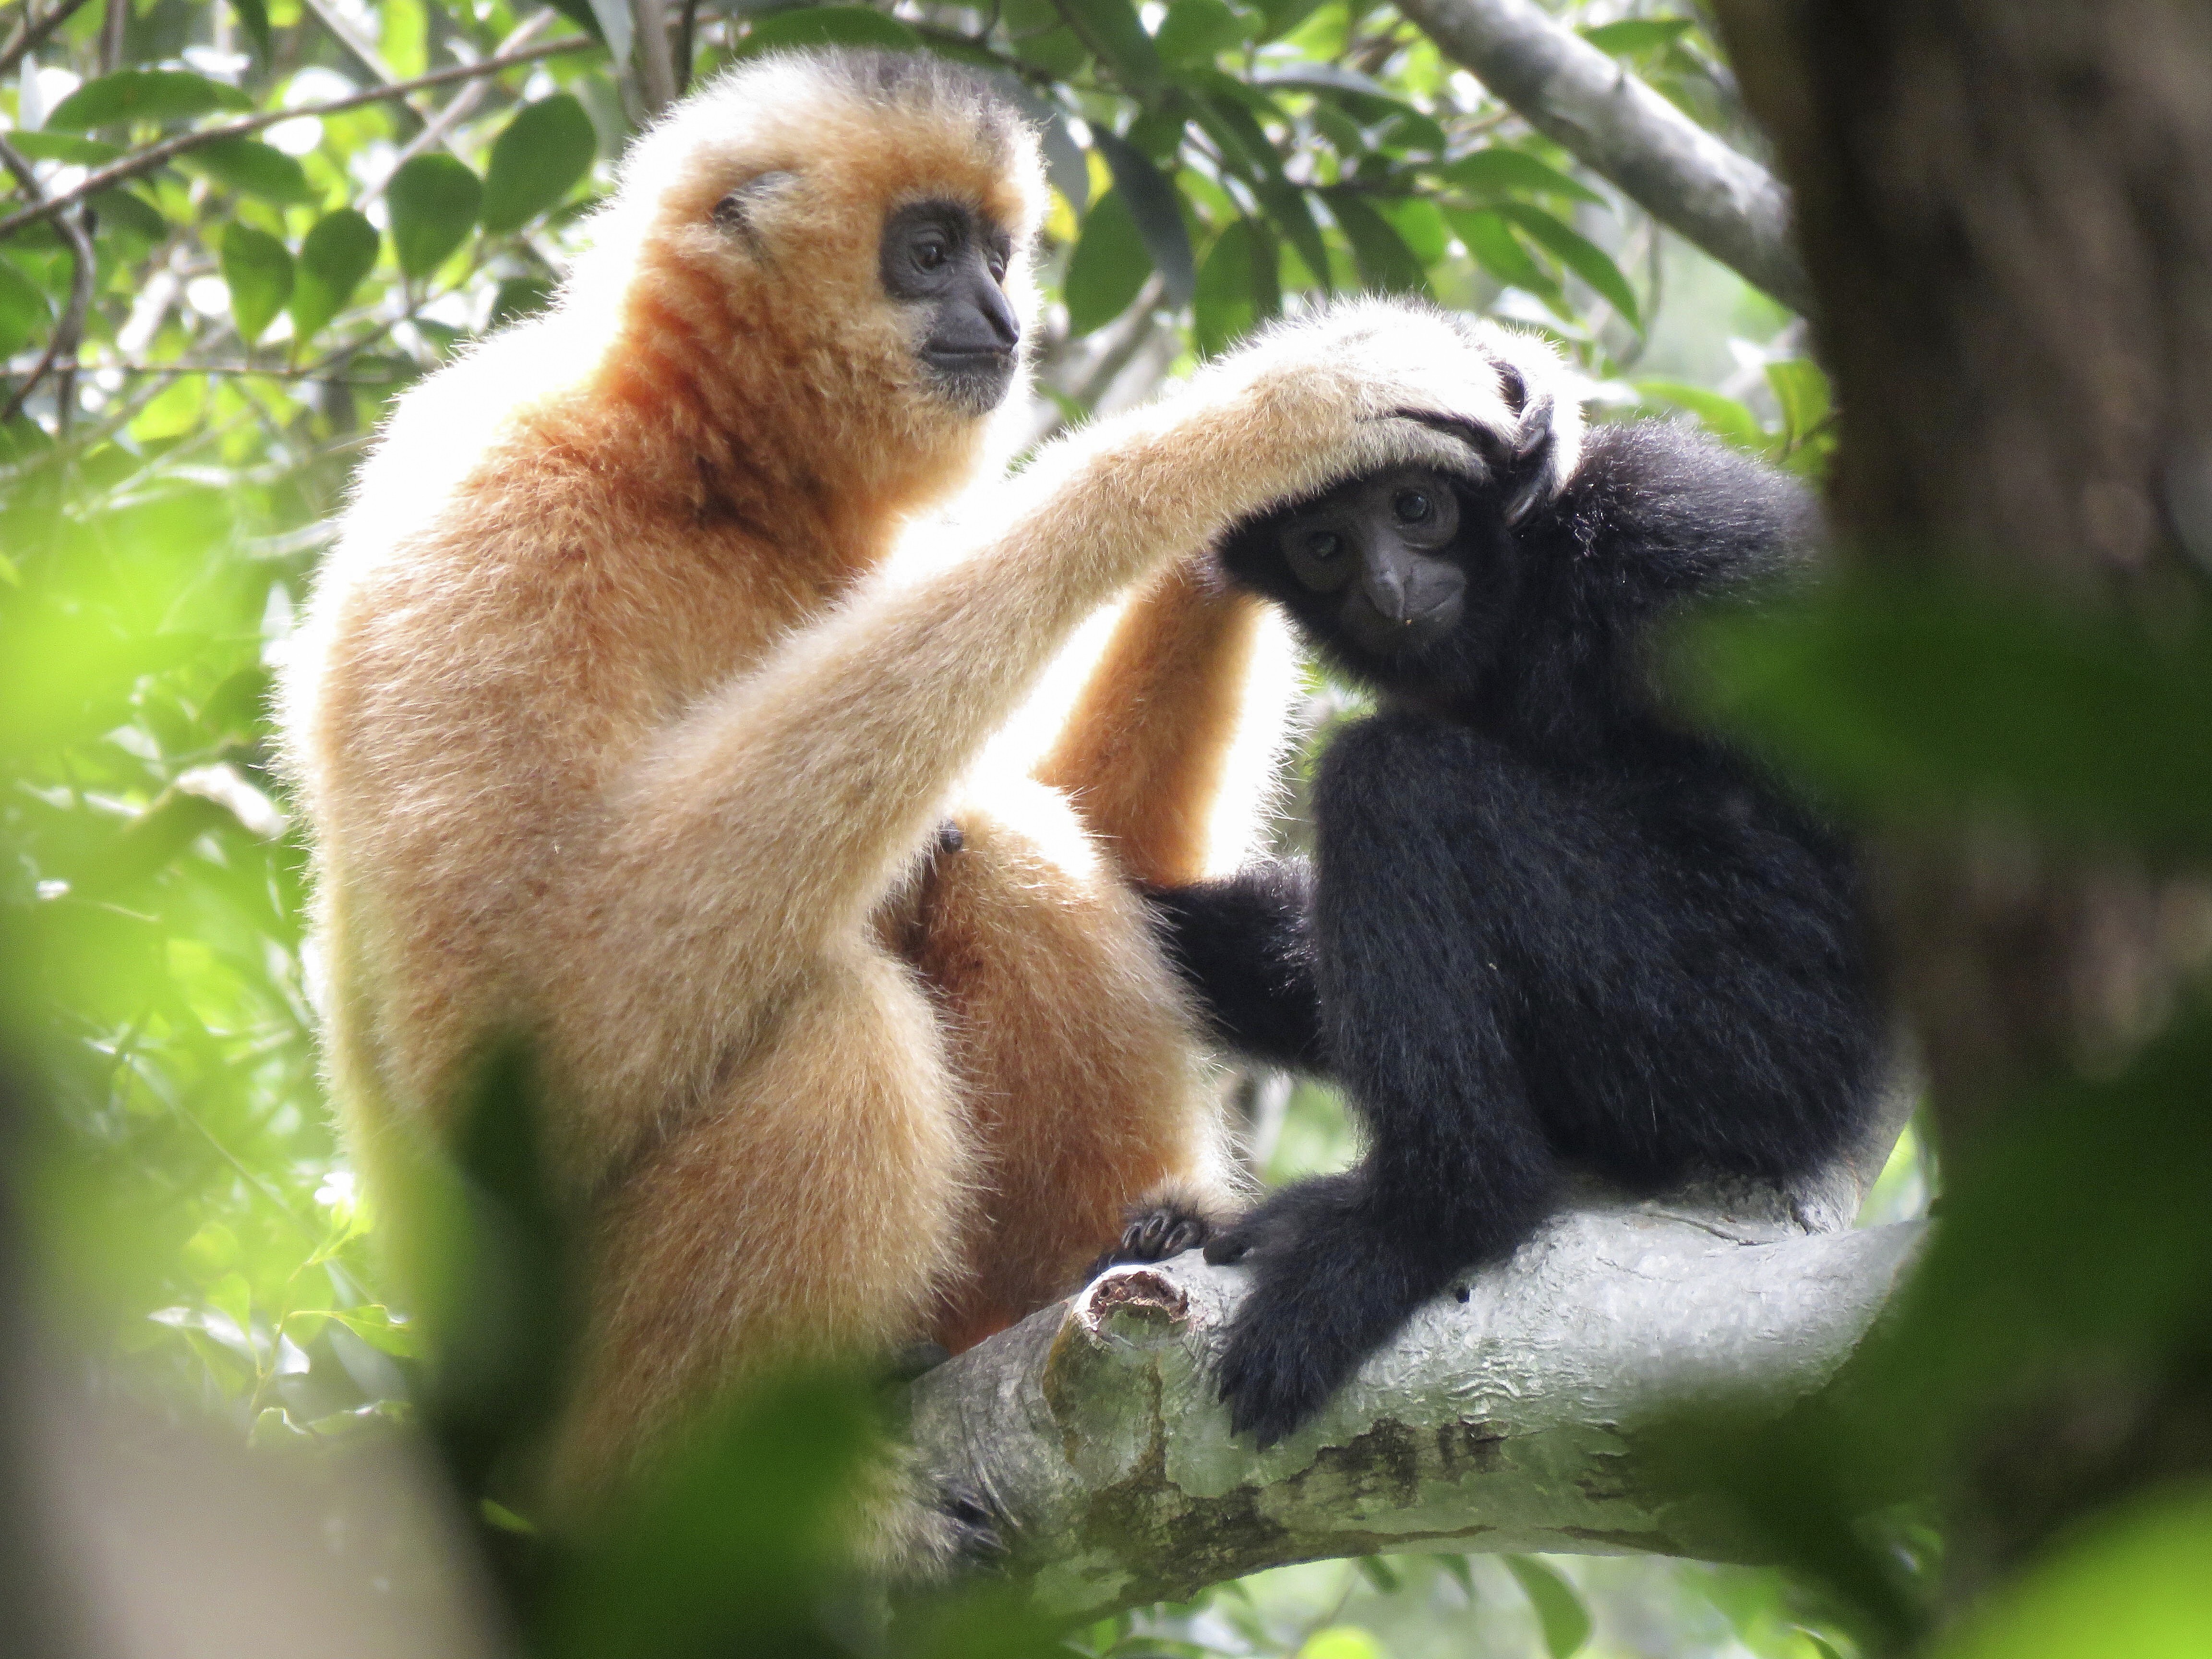 A female gibbon grooms a juvenile at the Bawangling National Nature Reserve in Hainan, China. The island is a biodiversity hotspot with some highly threatened endemic species, but has received relatively little conservation attention, one expert says. Photo: Kadoorie Farm and Botanic Garden